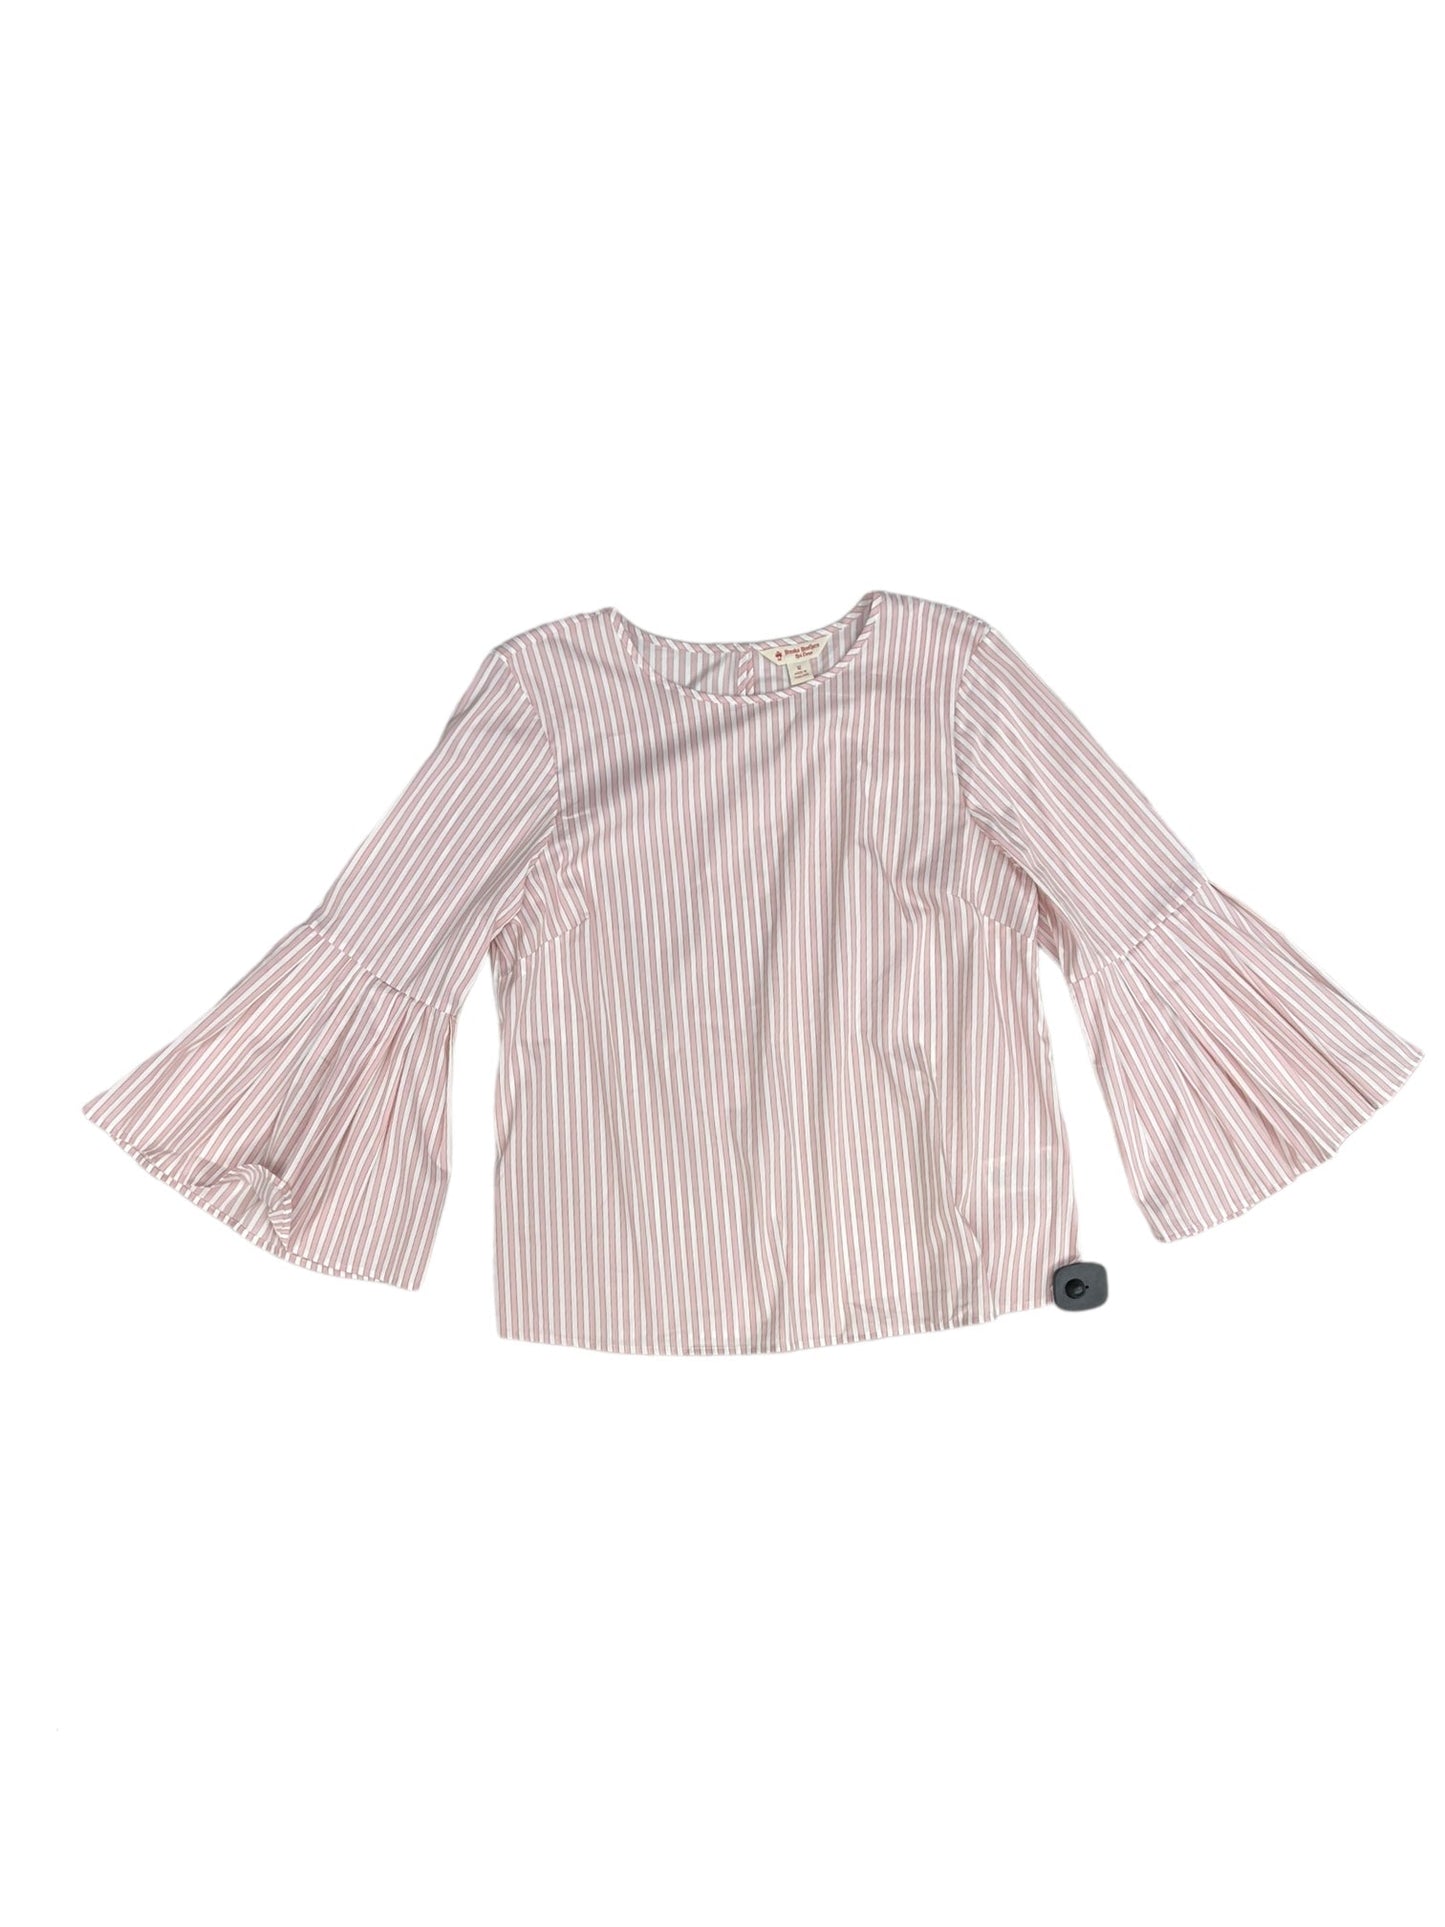 Pink & White Top Long Sleeve Brooks Brothers, Size 12